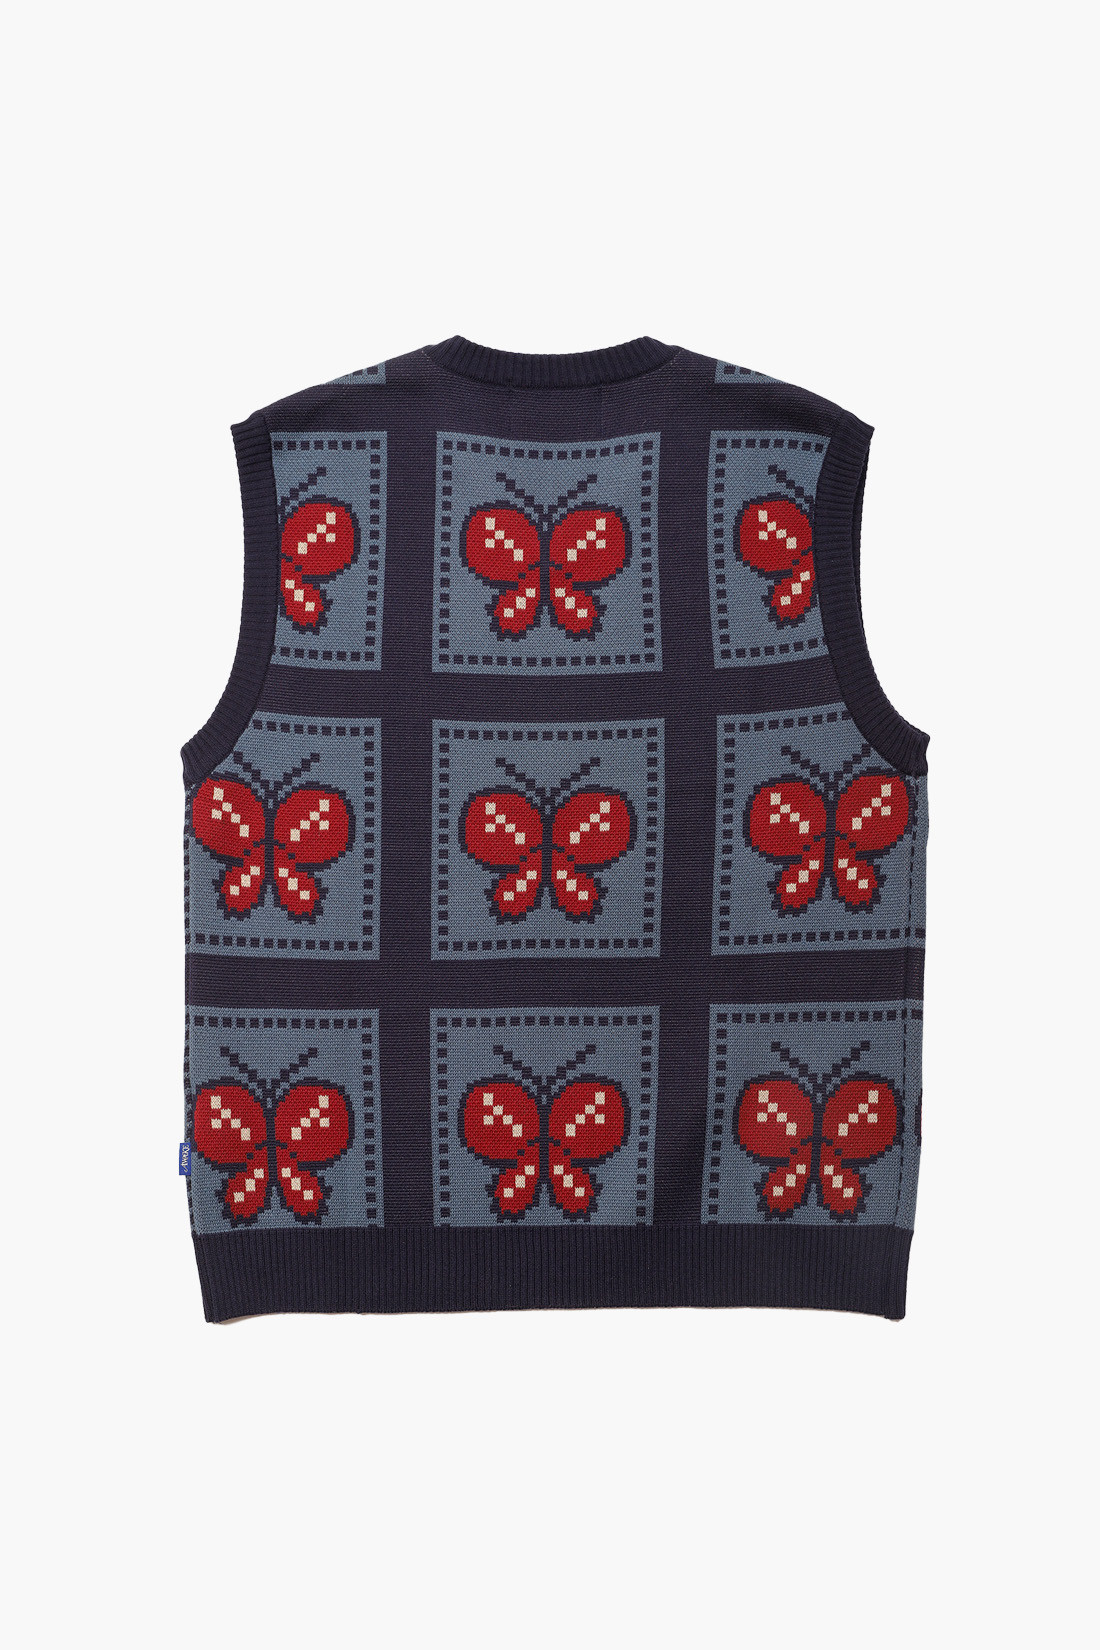 Awake ny Butterfly sweater vest Blue/red - GRADUATE STORE